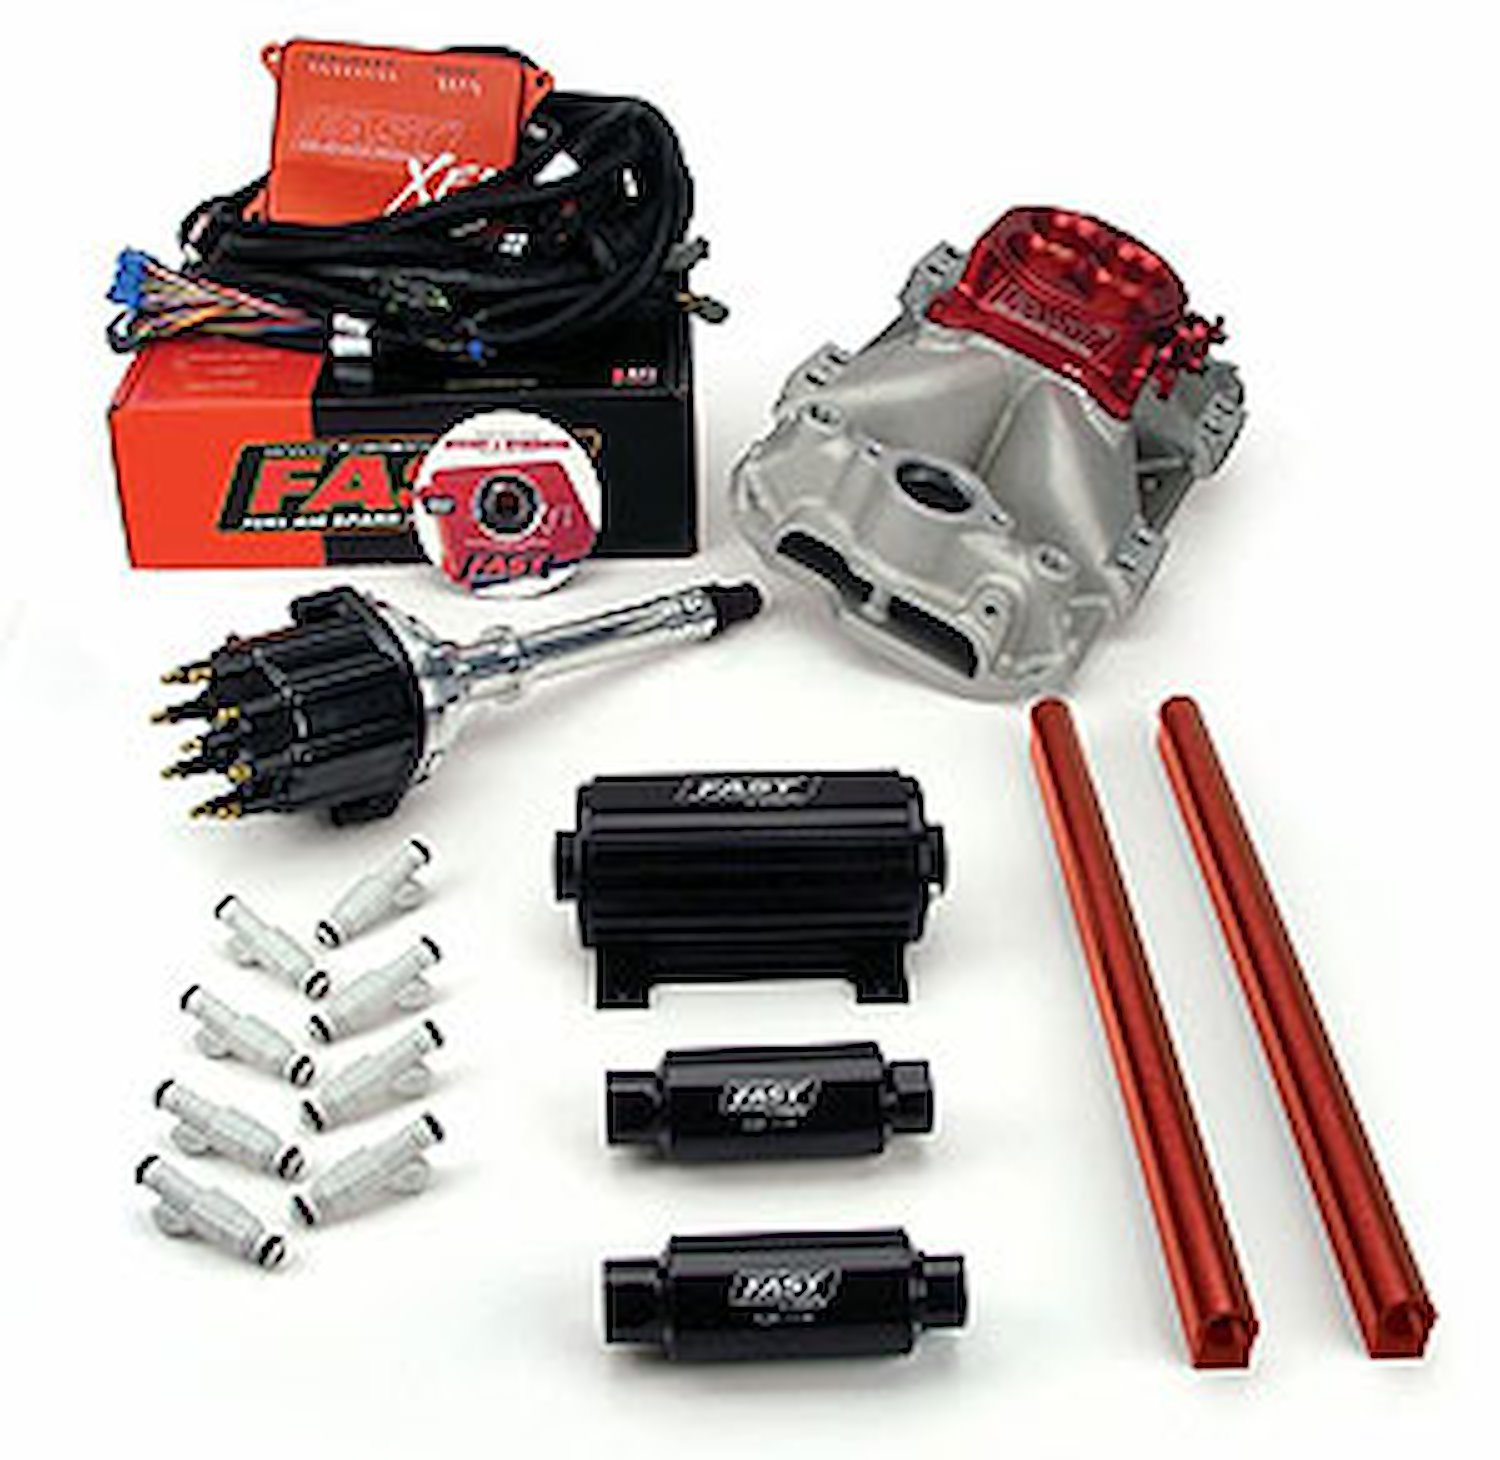 XFI 2.0 Fuel Injection Kit Small Block Chevy